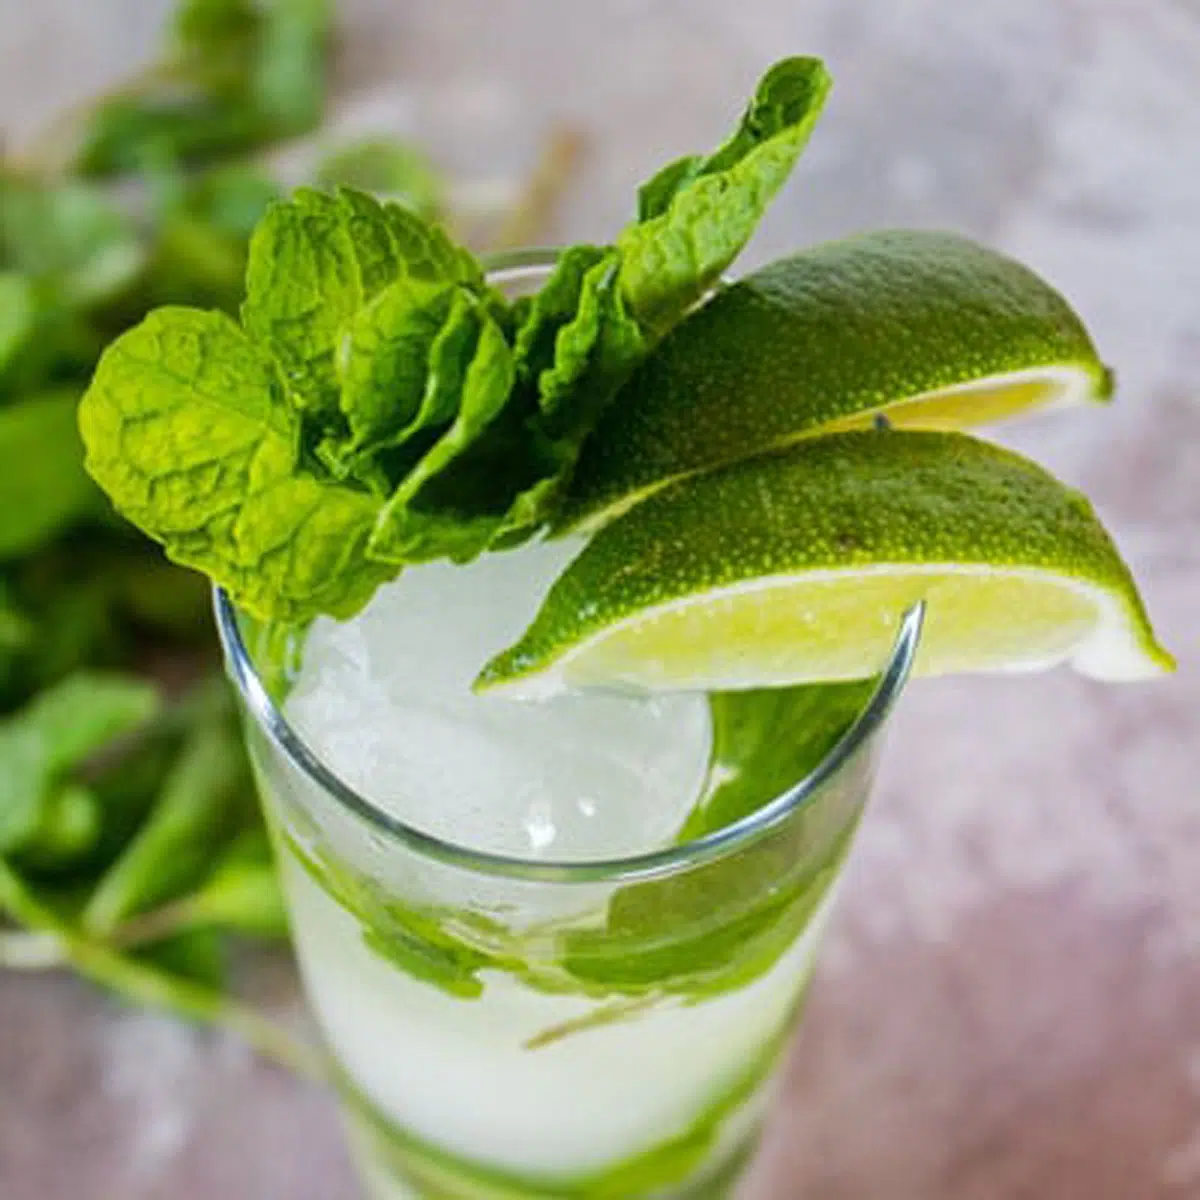 Angled picture of a glass of mojito, with ice, limes, and mint.